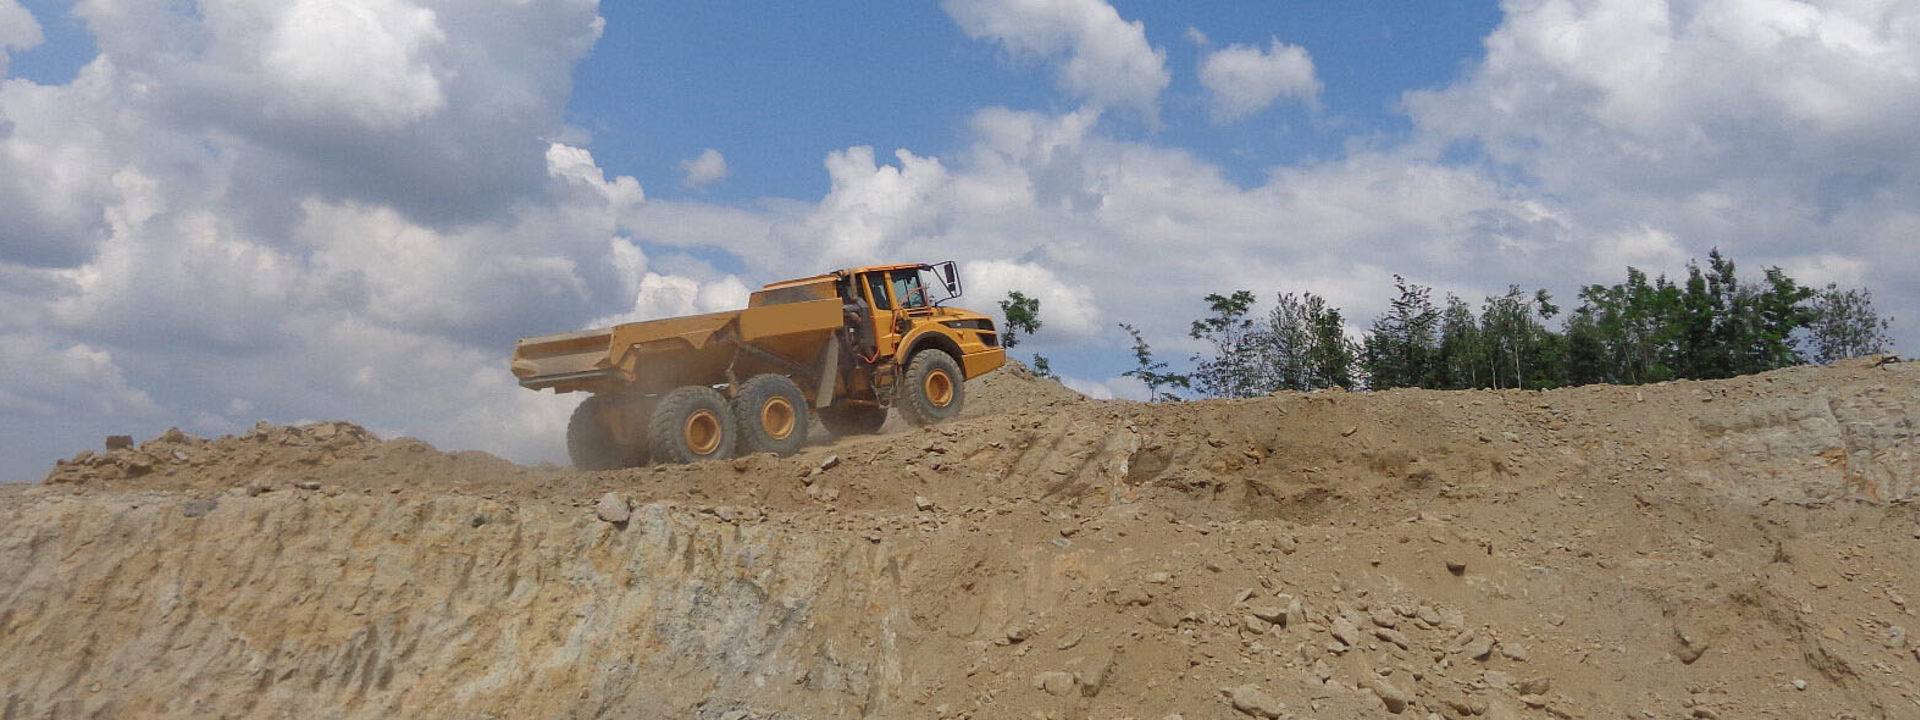 An articulated dump truck equipped with Bridgestone off-the-road tyres